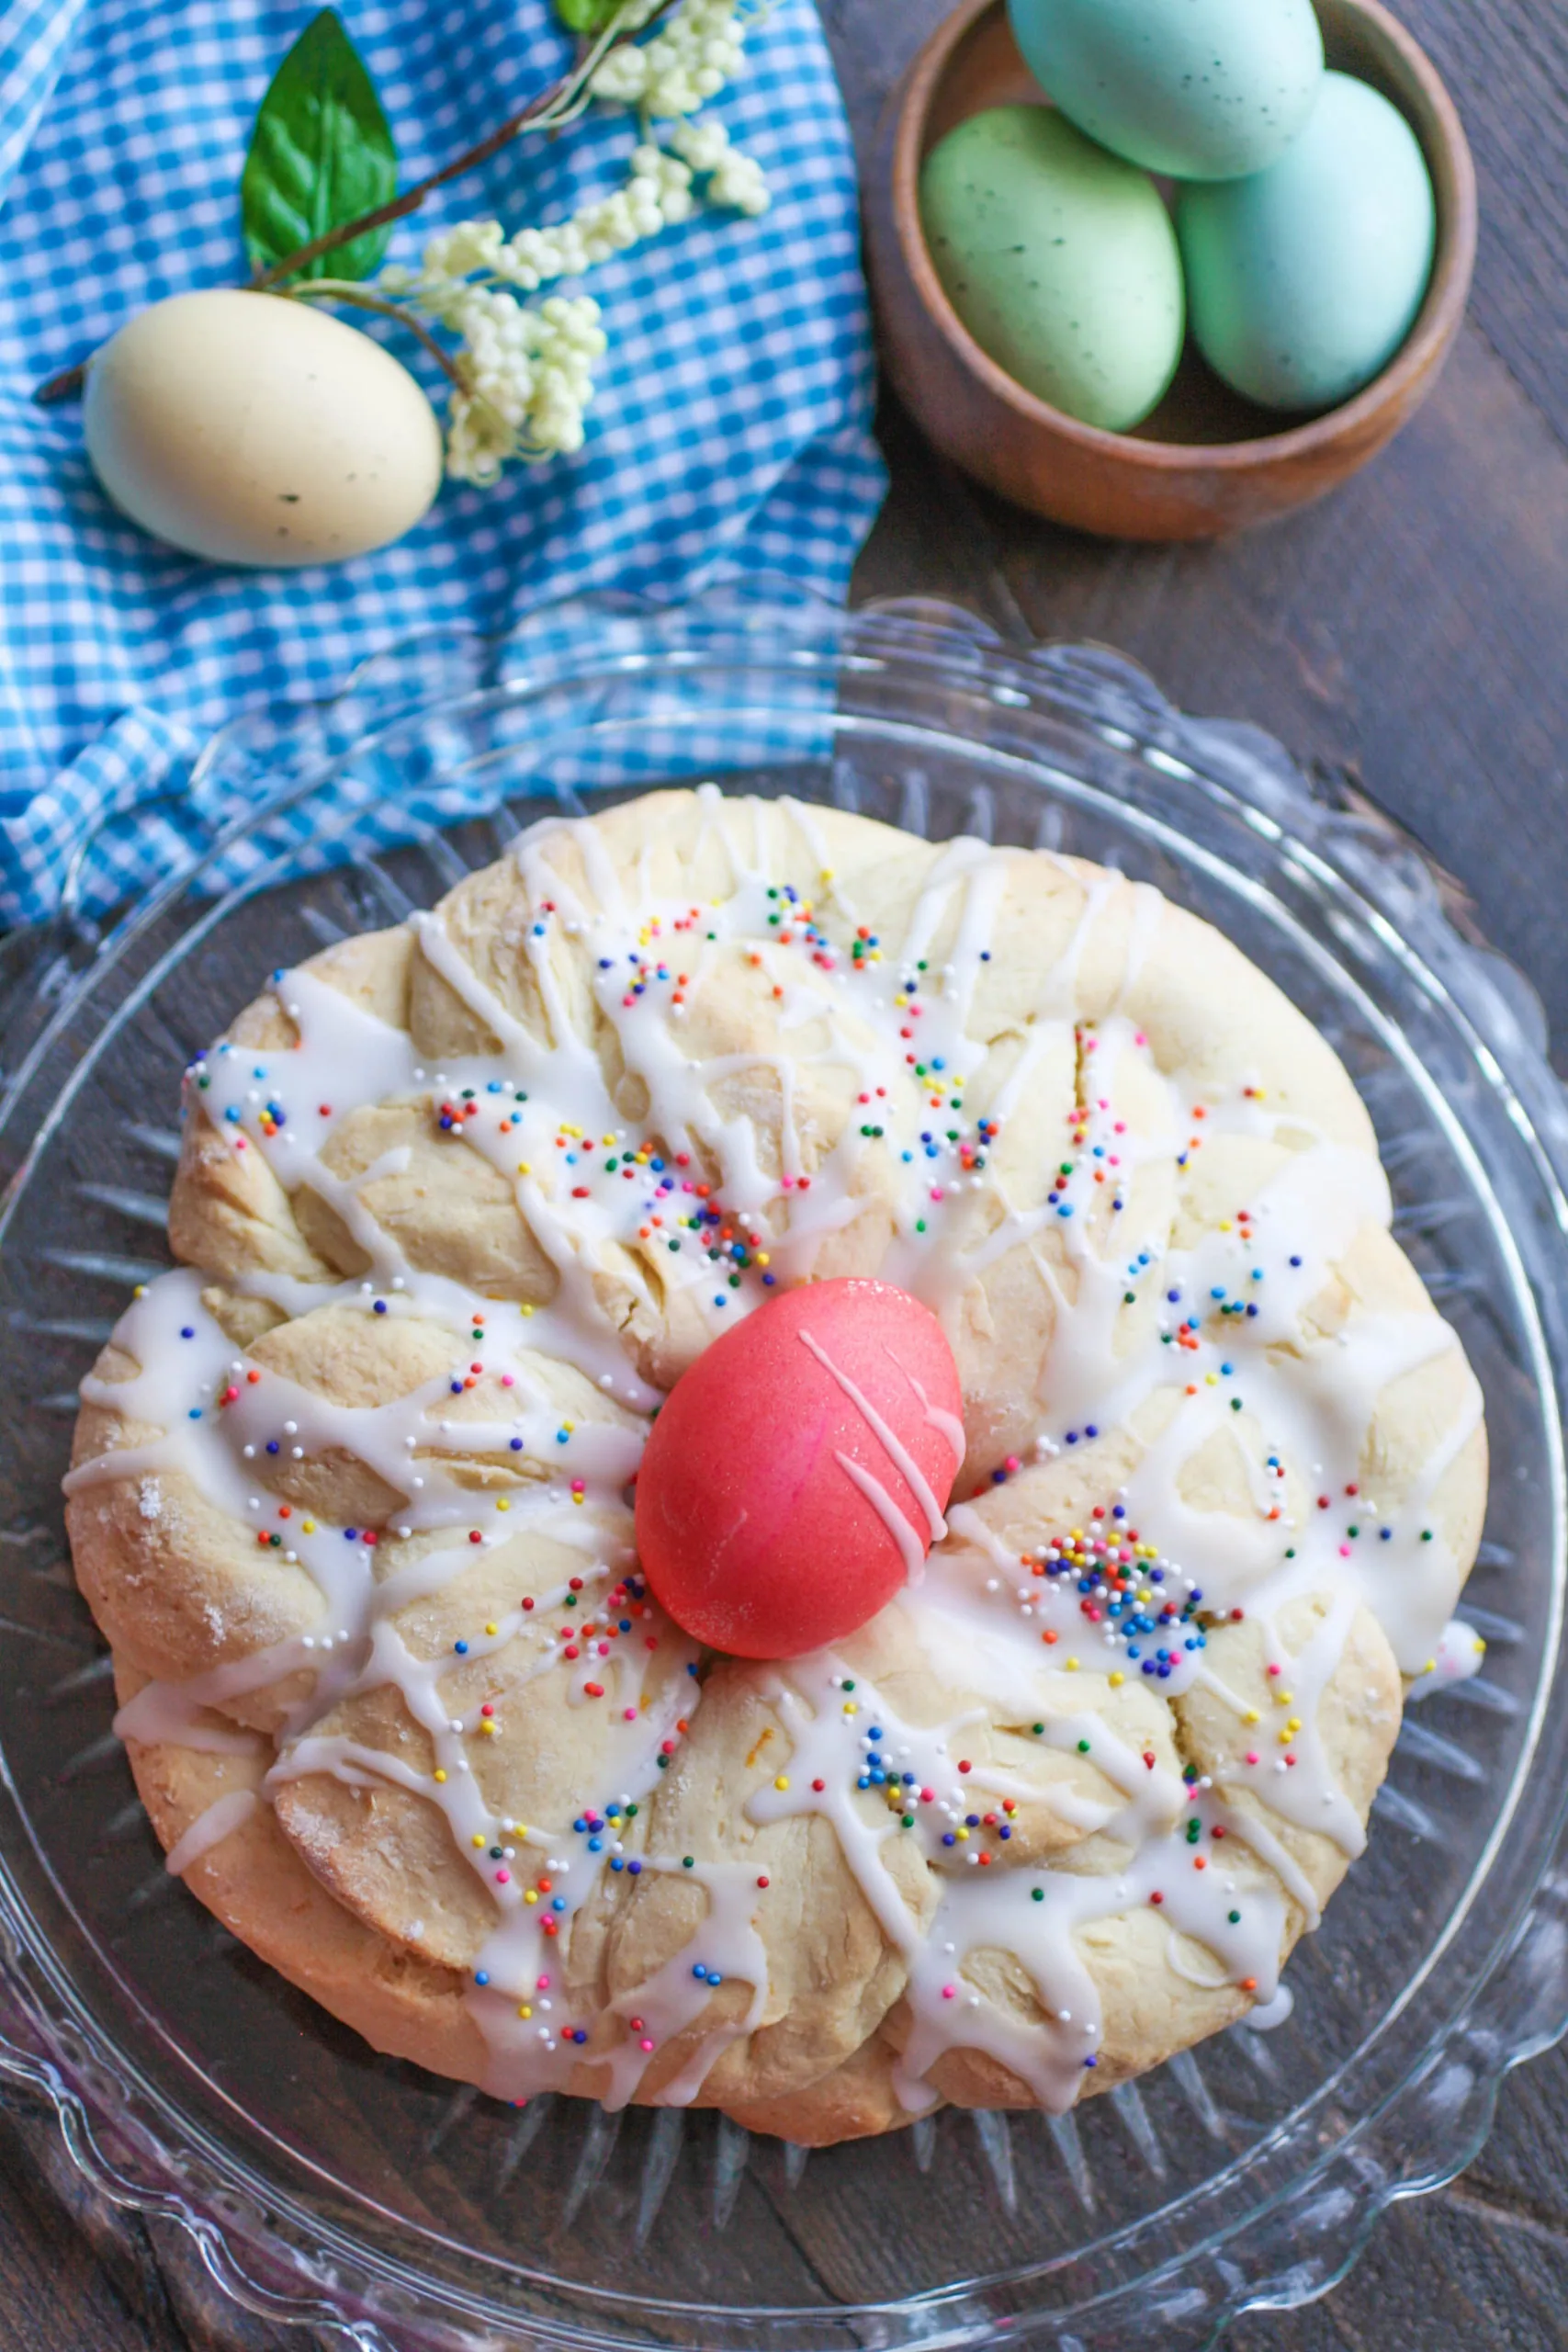 No-Rise Italian Easter Bread is a lovely treat for the spring season.